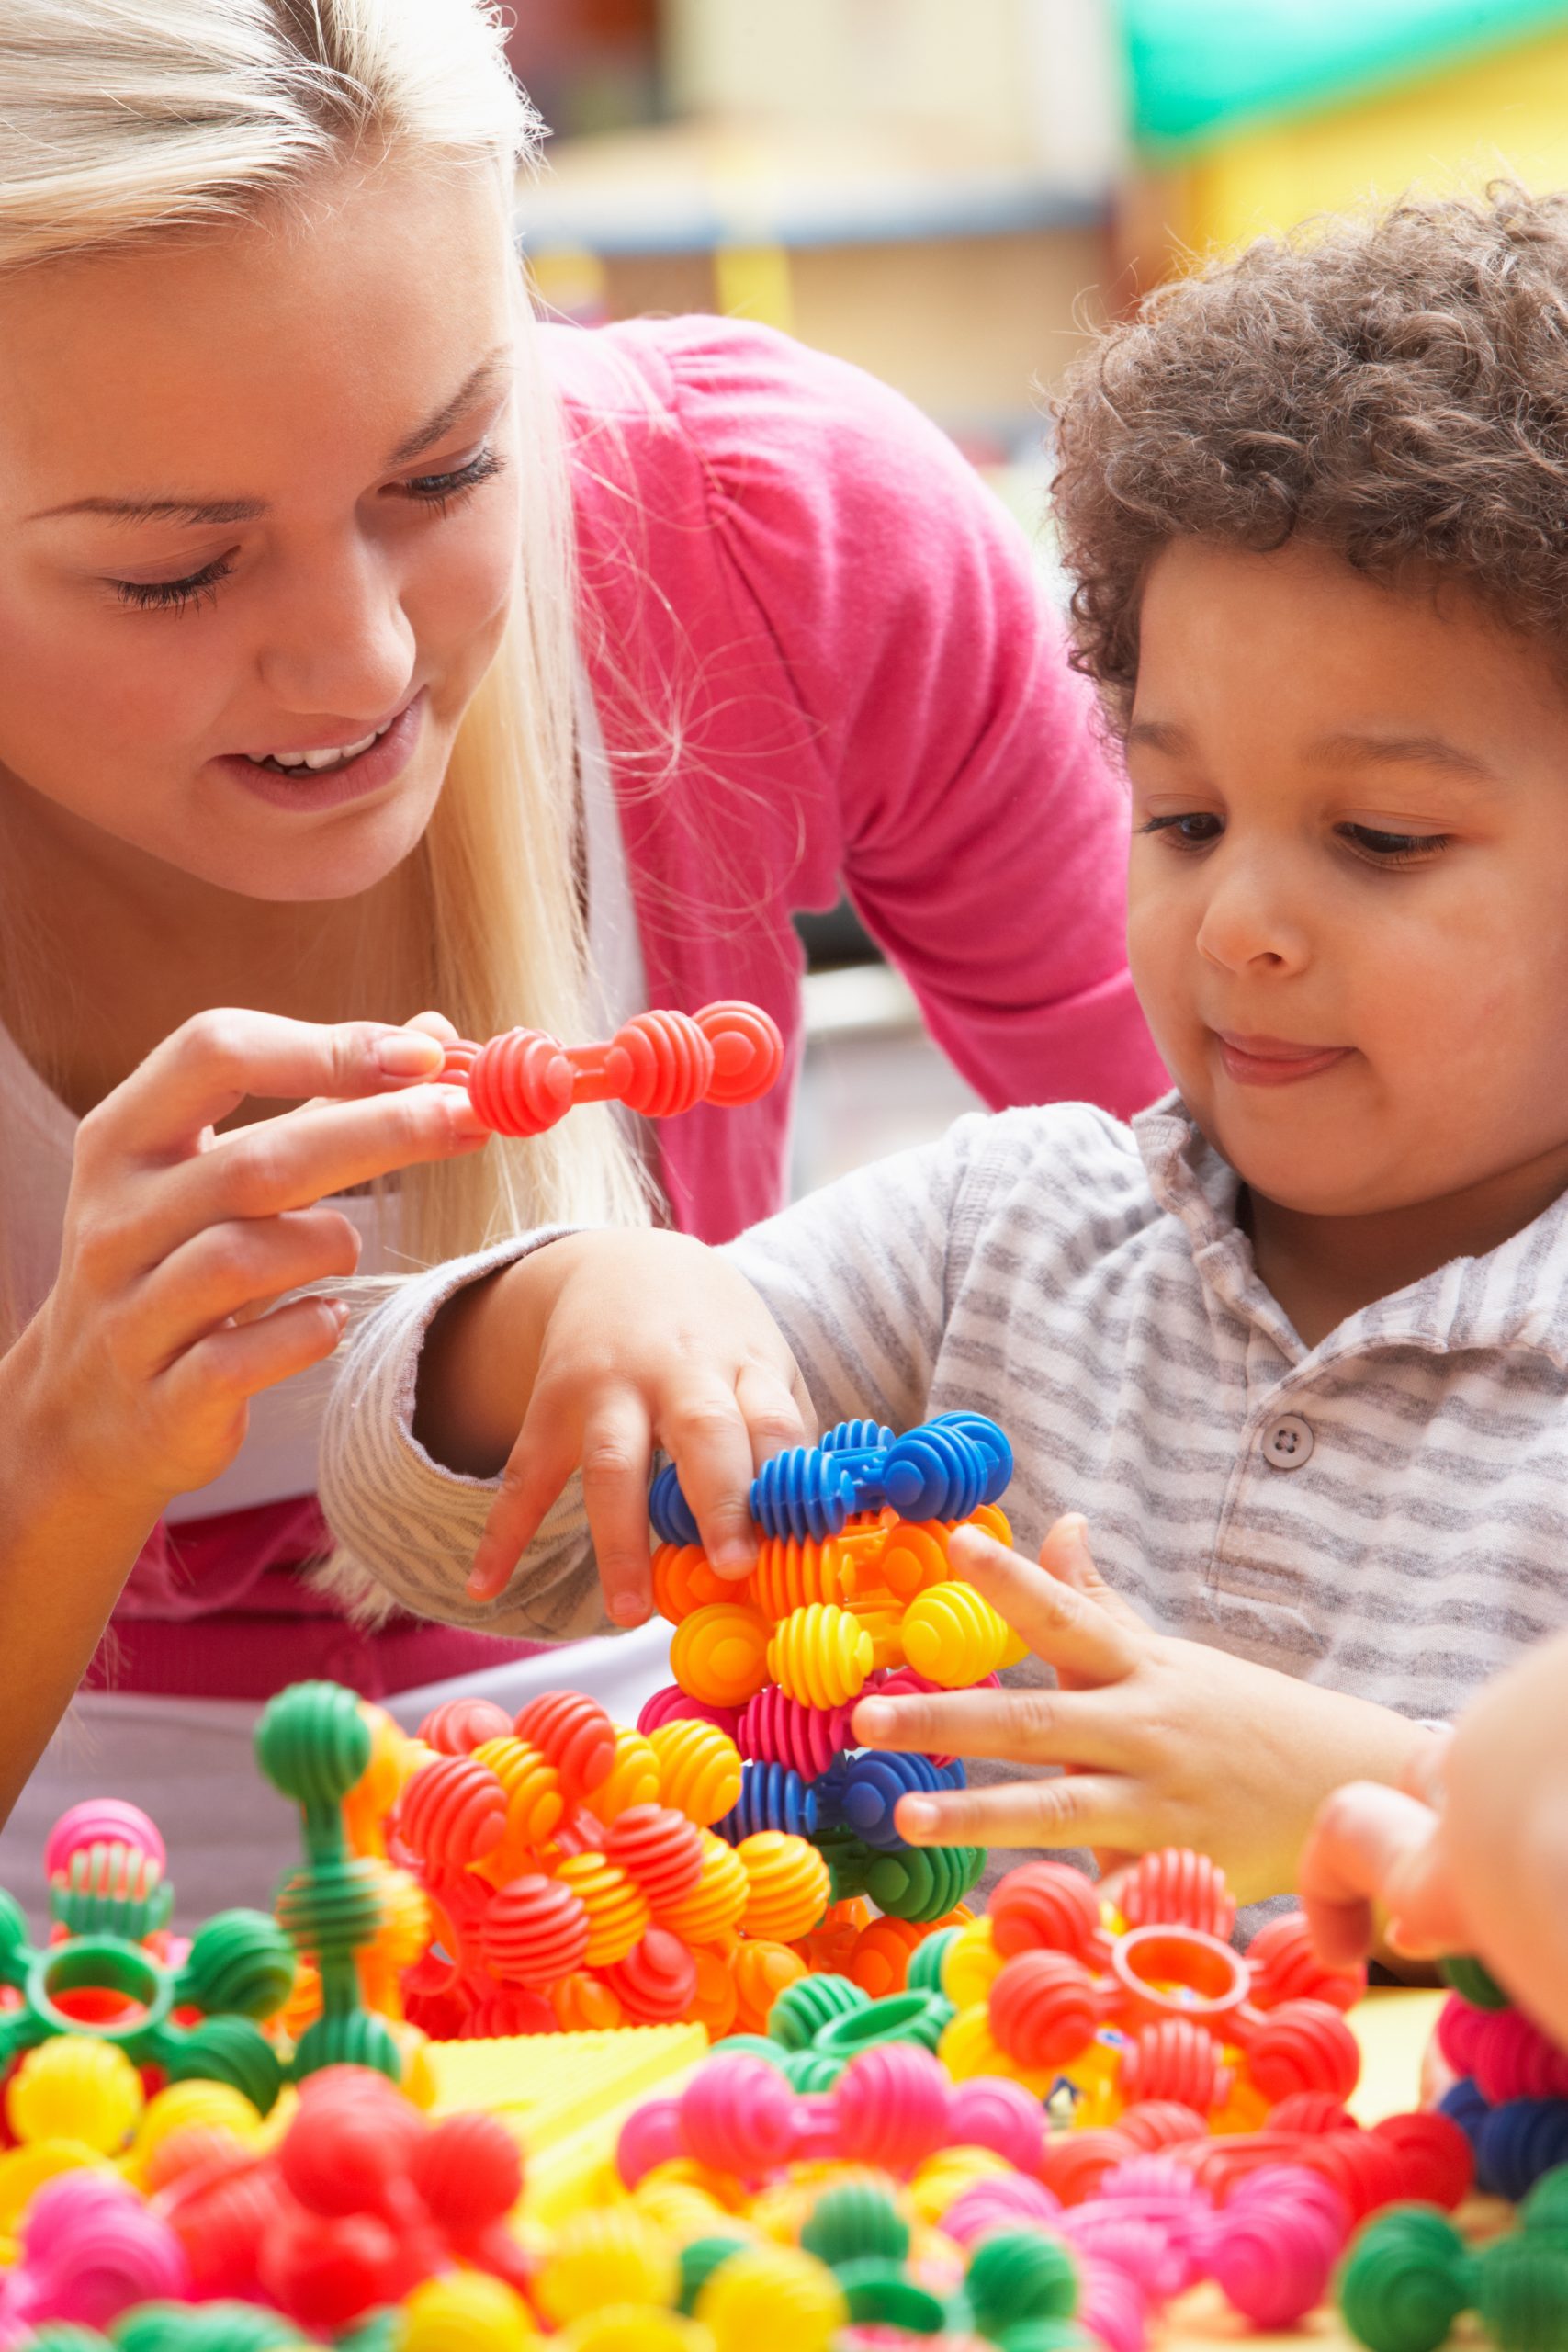 Young woman playing with a boy by stacking toys on top of each other